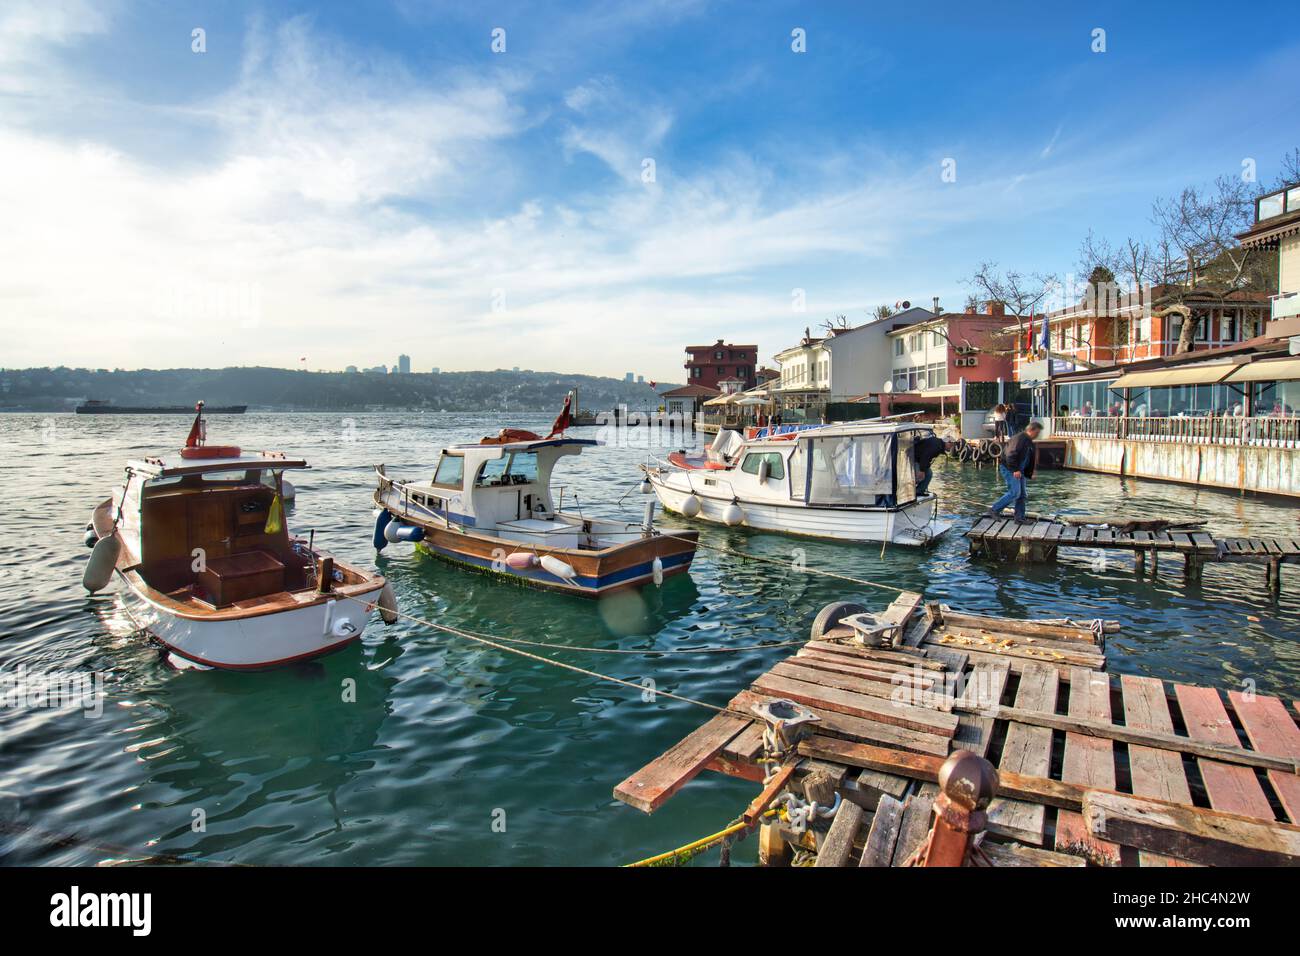 Panorama view of Cengelkoy coast on a sunny day. Cengelkoy is a neighborhood in the Uskudar district on the Asian shore of the Bosphorus in Istanbul. Stock Photo